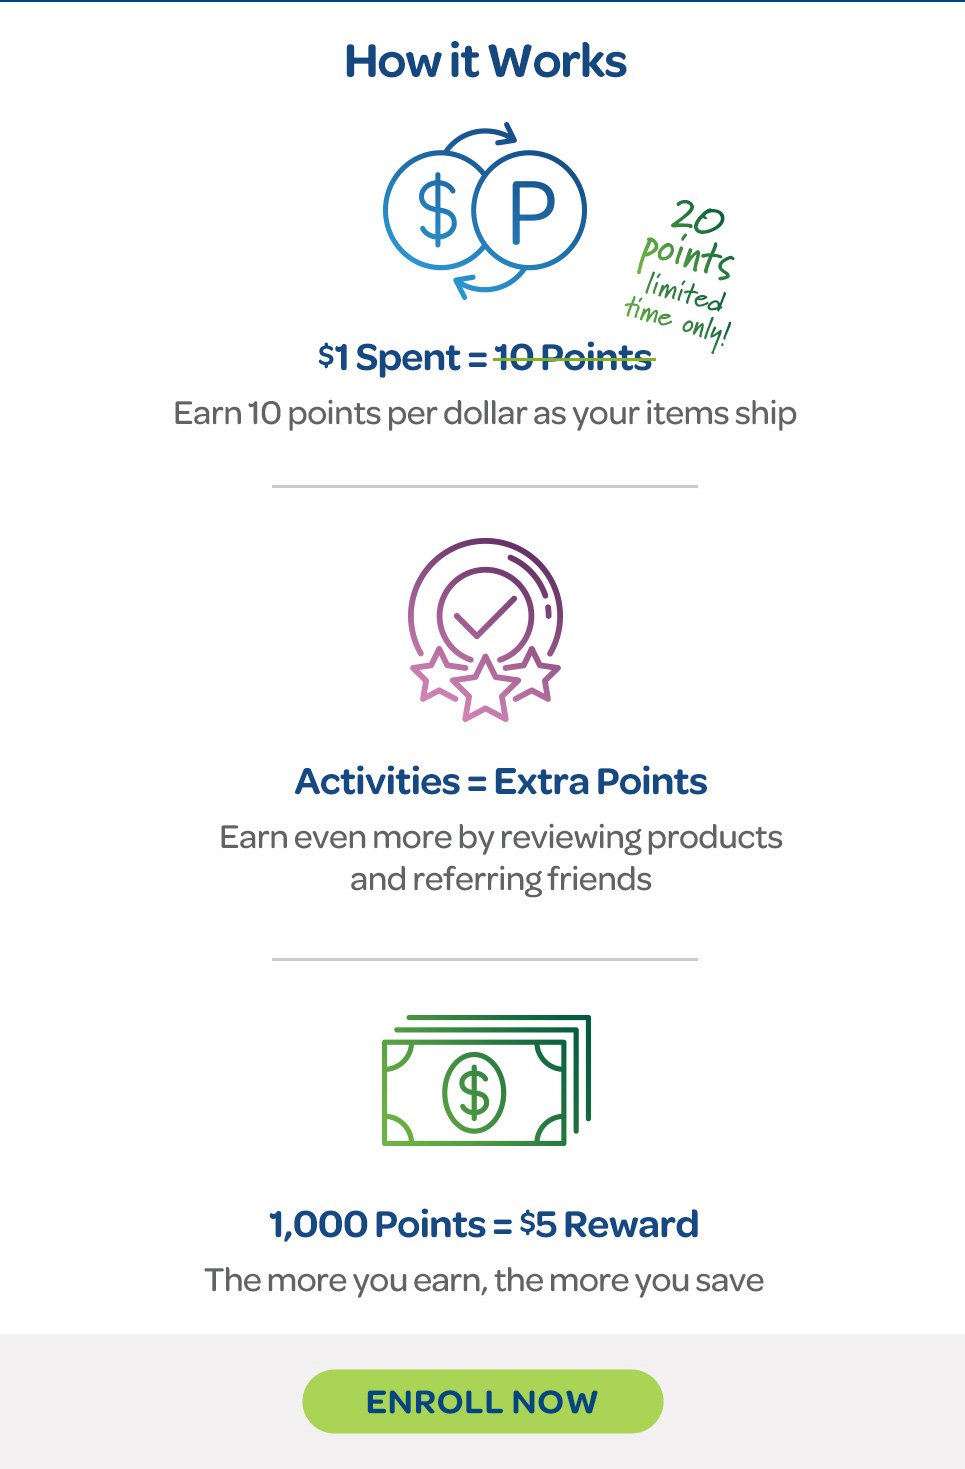 How it works: 1 USD Spent = 10 Points, Activities = Extra Points, 1,000 Points = 5 USD Reward. Enroll now.